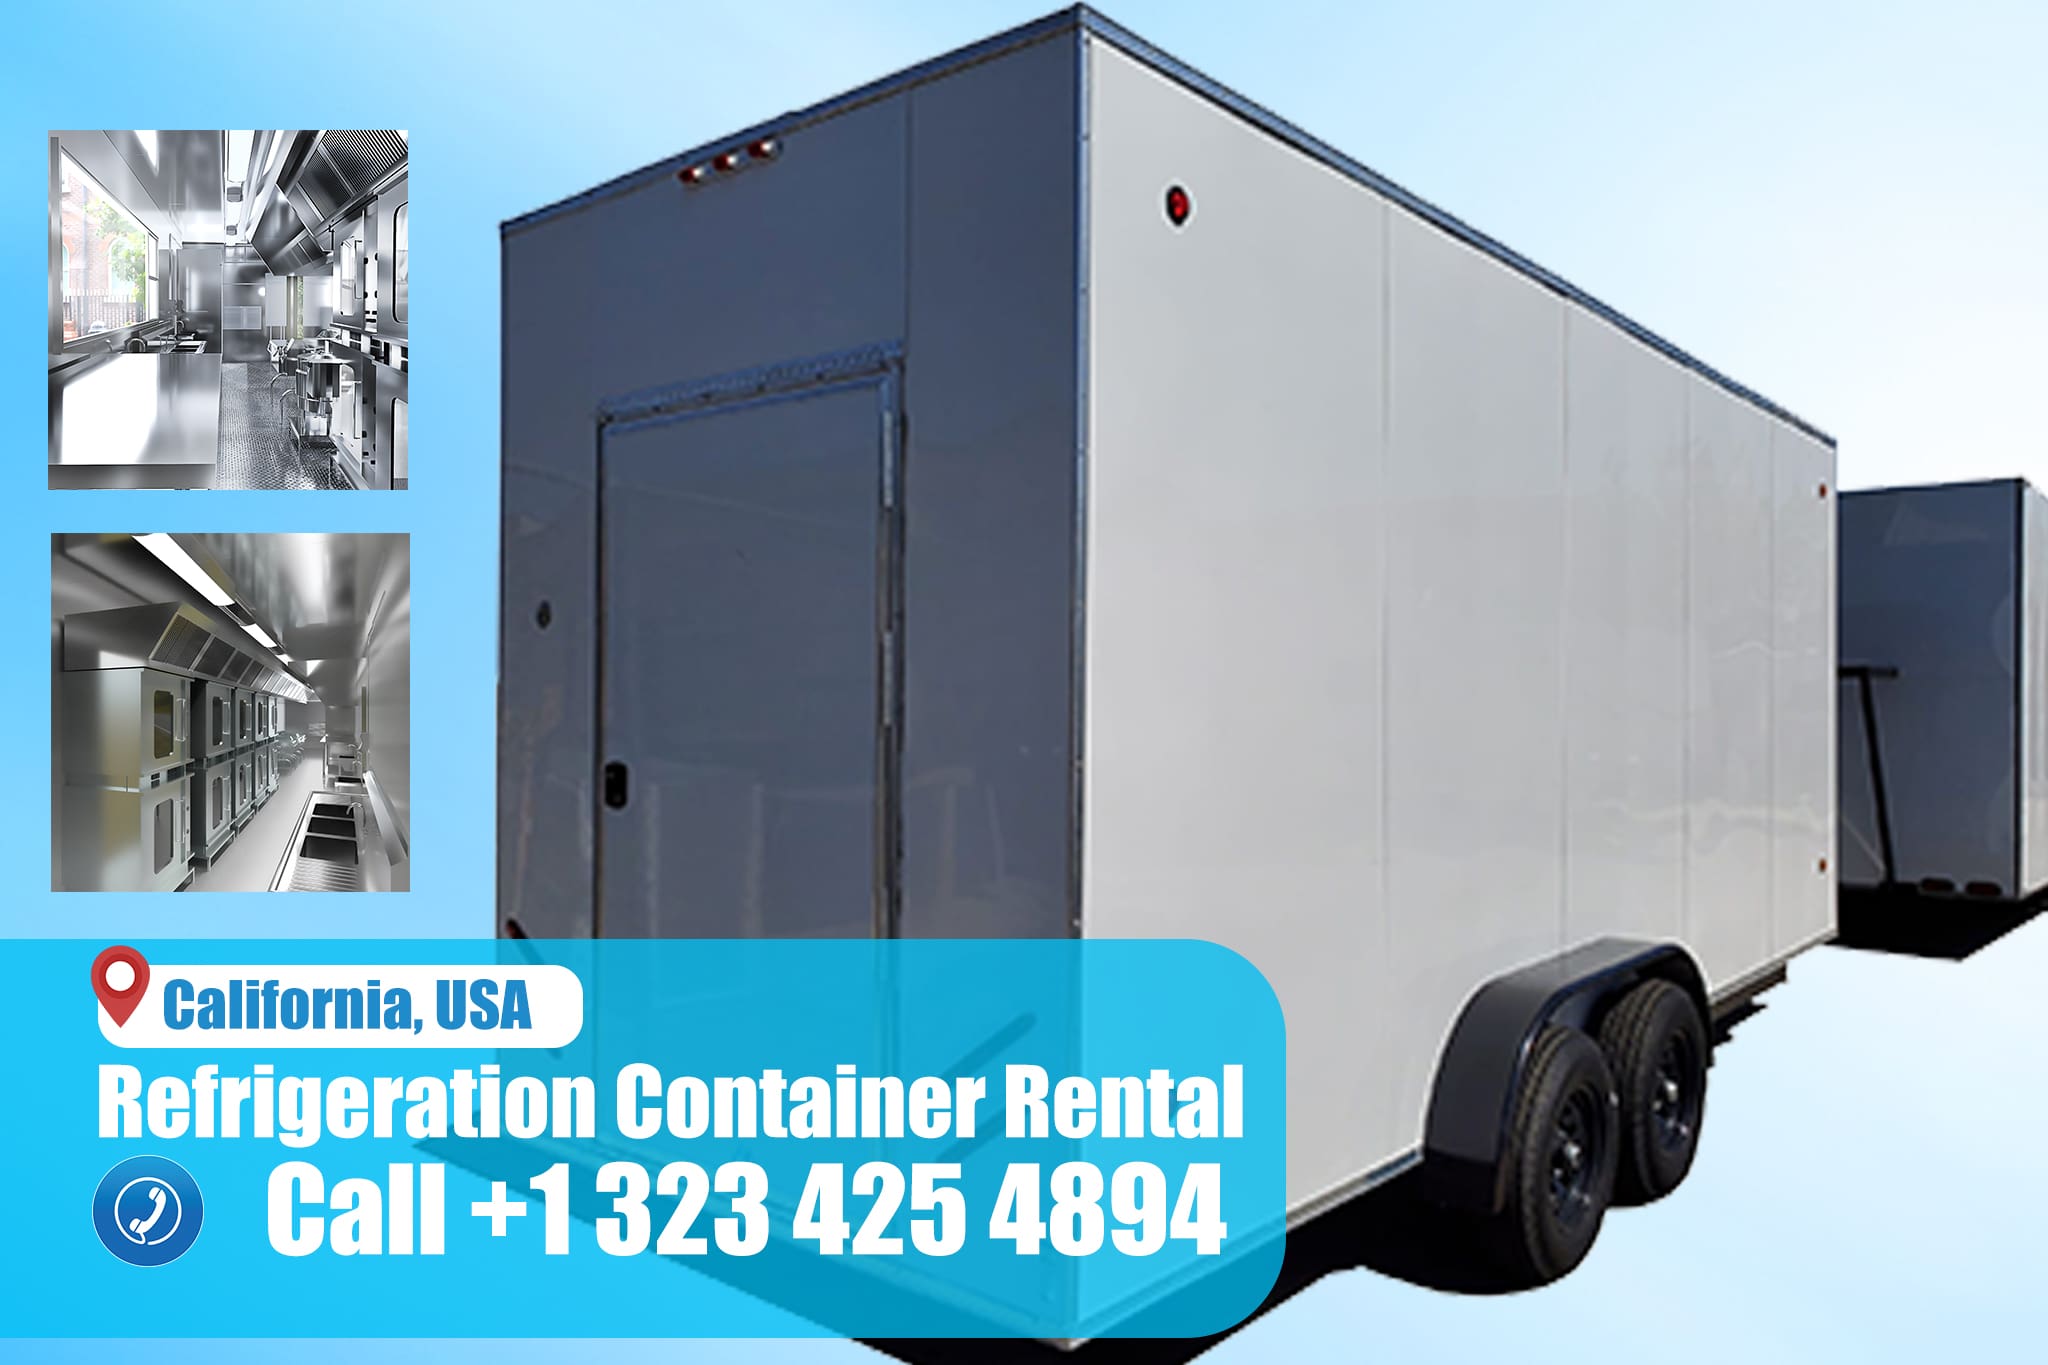 Refrigeration Container Rental in California